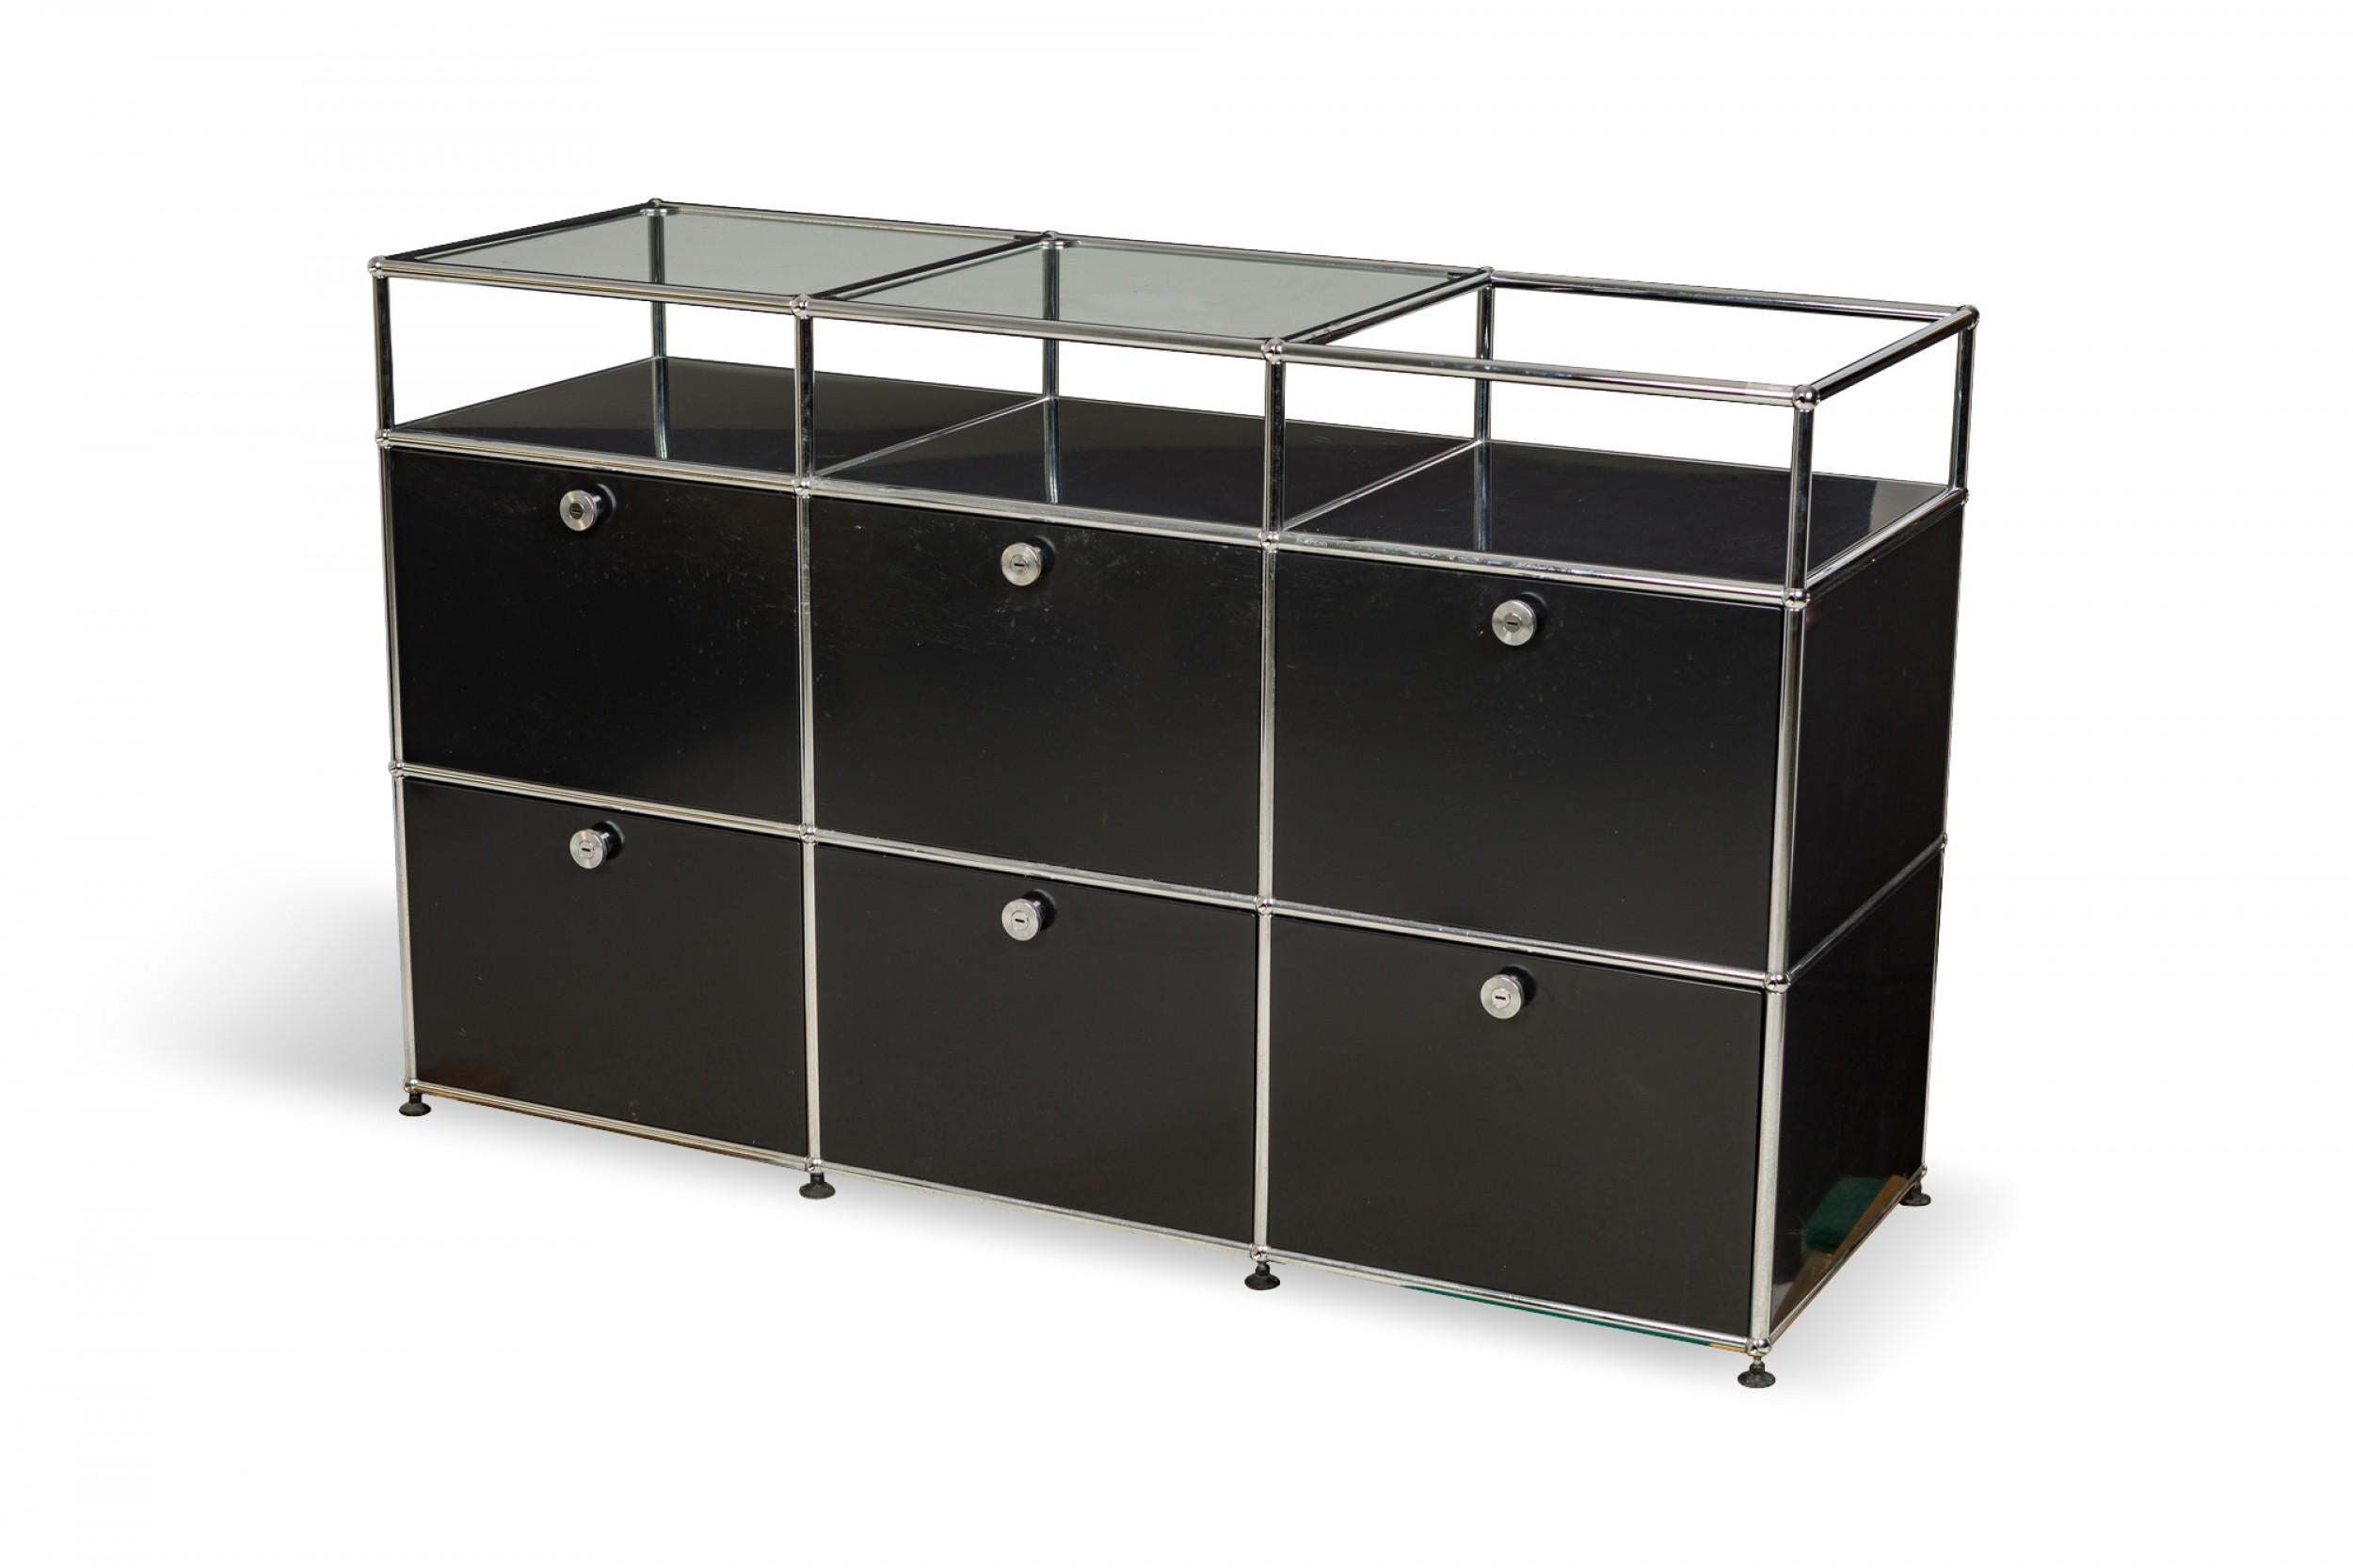 American Mid-Century display / storage cabinet with a lower black powder coated steel cabinet with six compartments below three open upper compartments, framed in a chrome plated steel tube structure under two clear glass panels. (FRITZ HALLER FOR